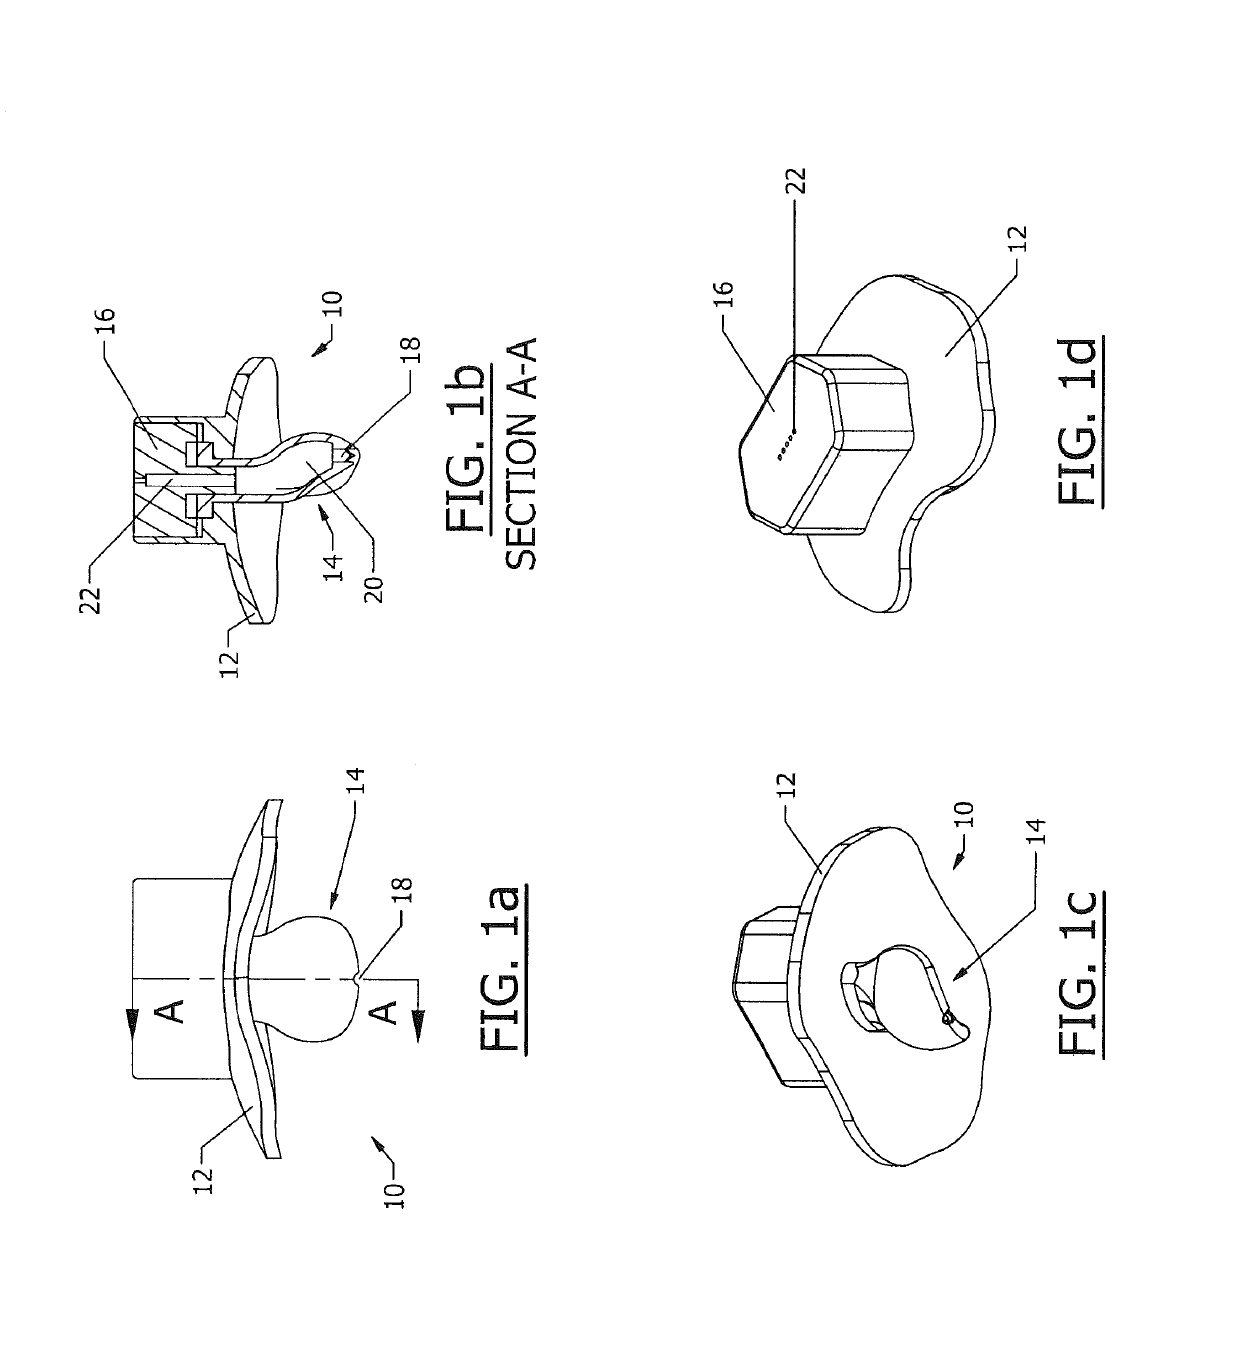 Flow-controlling pacifier weaning apparatus